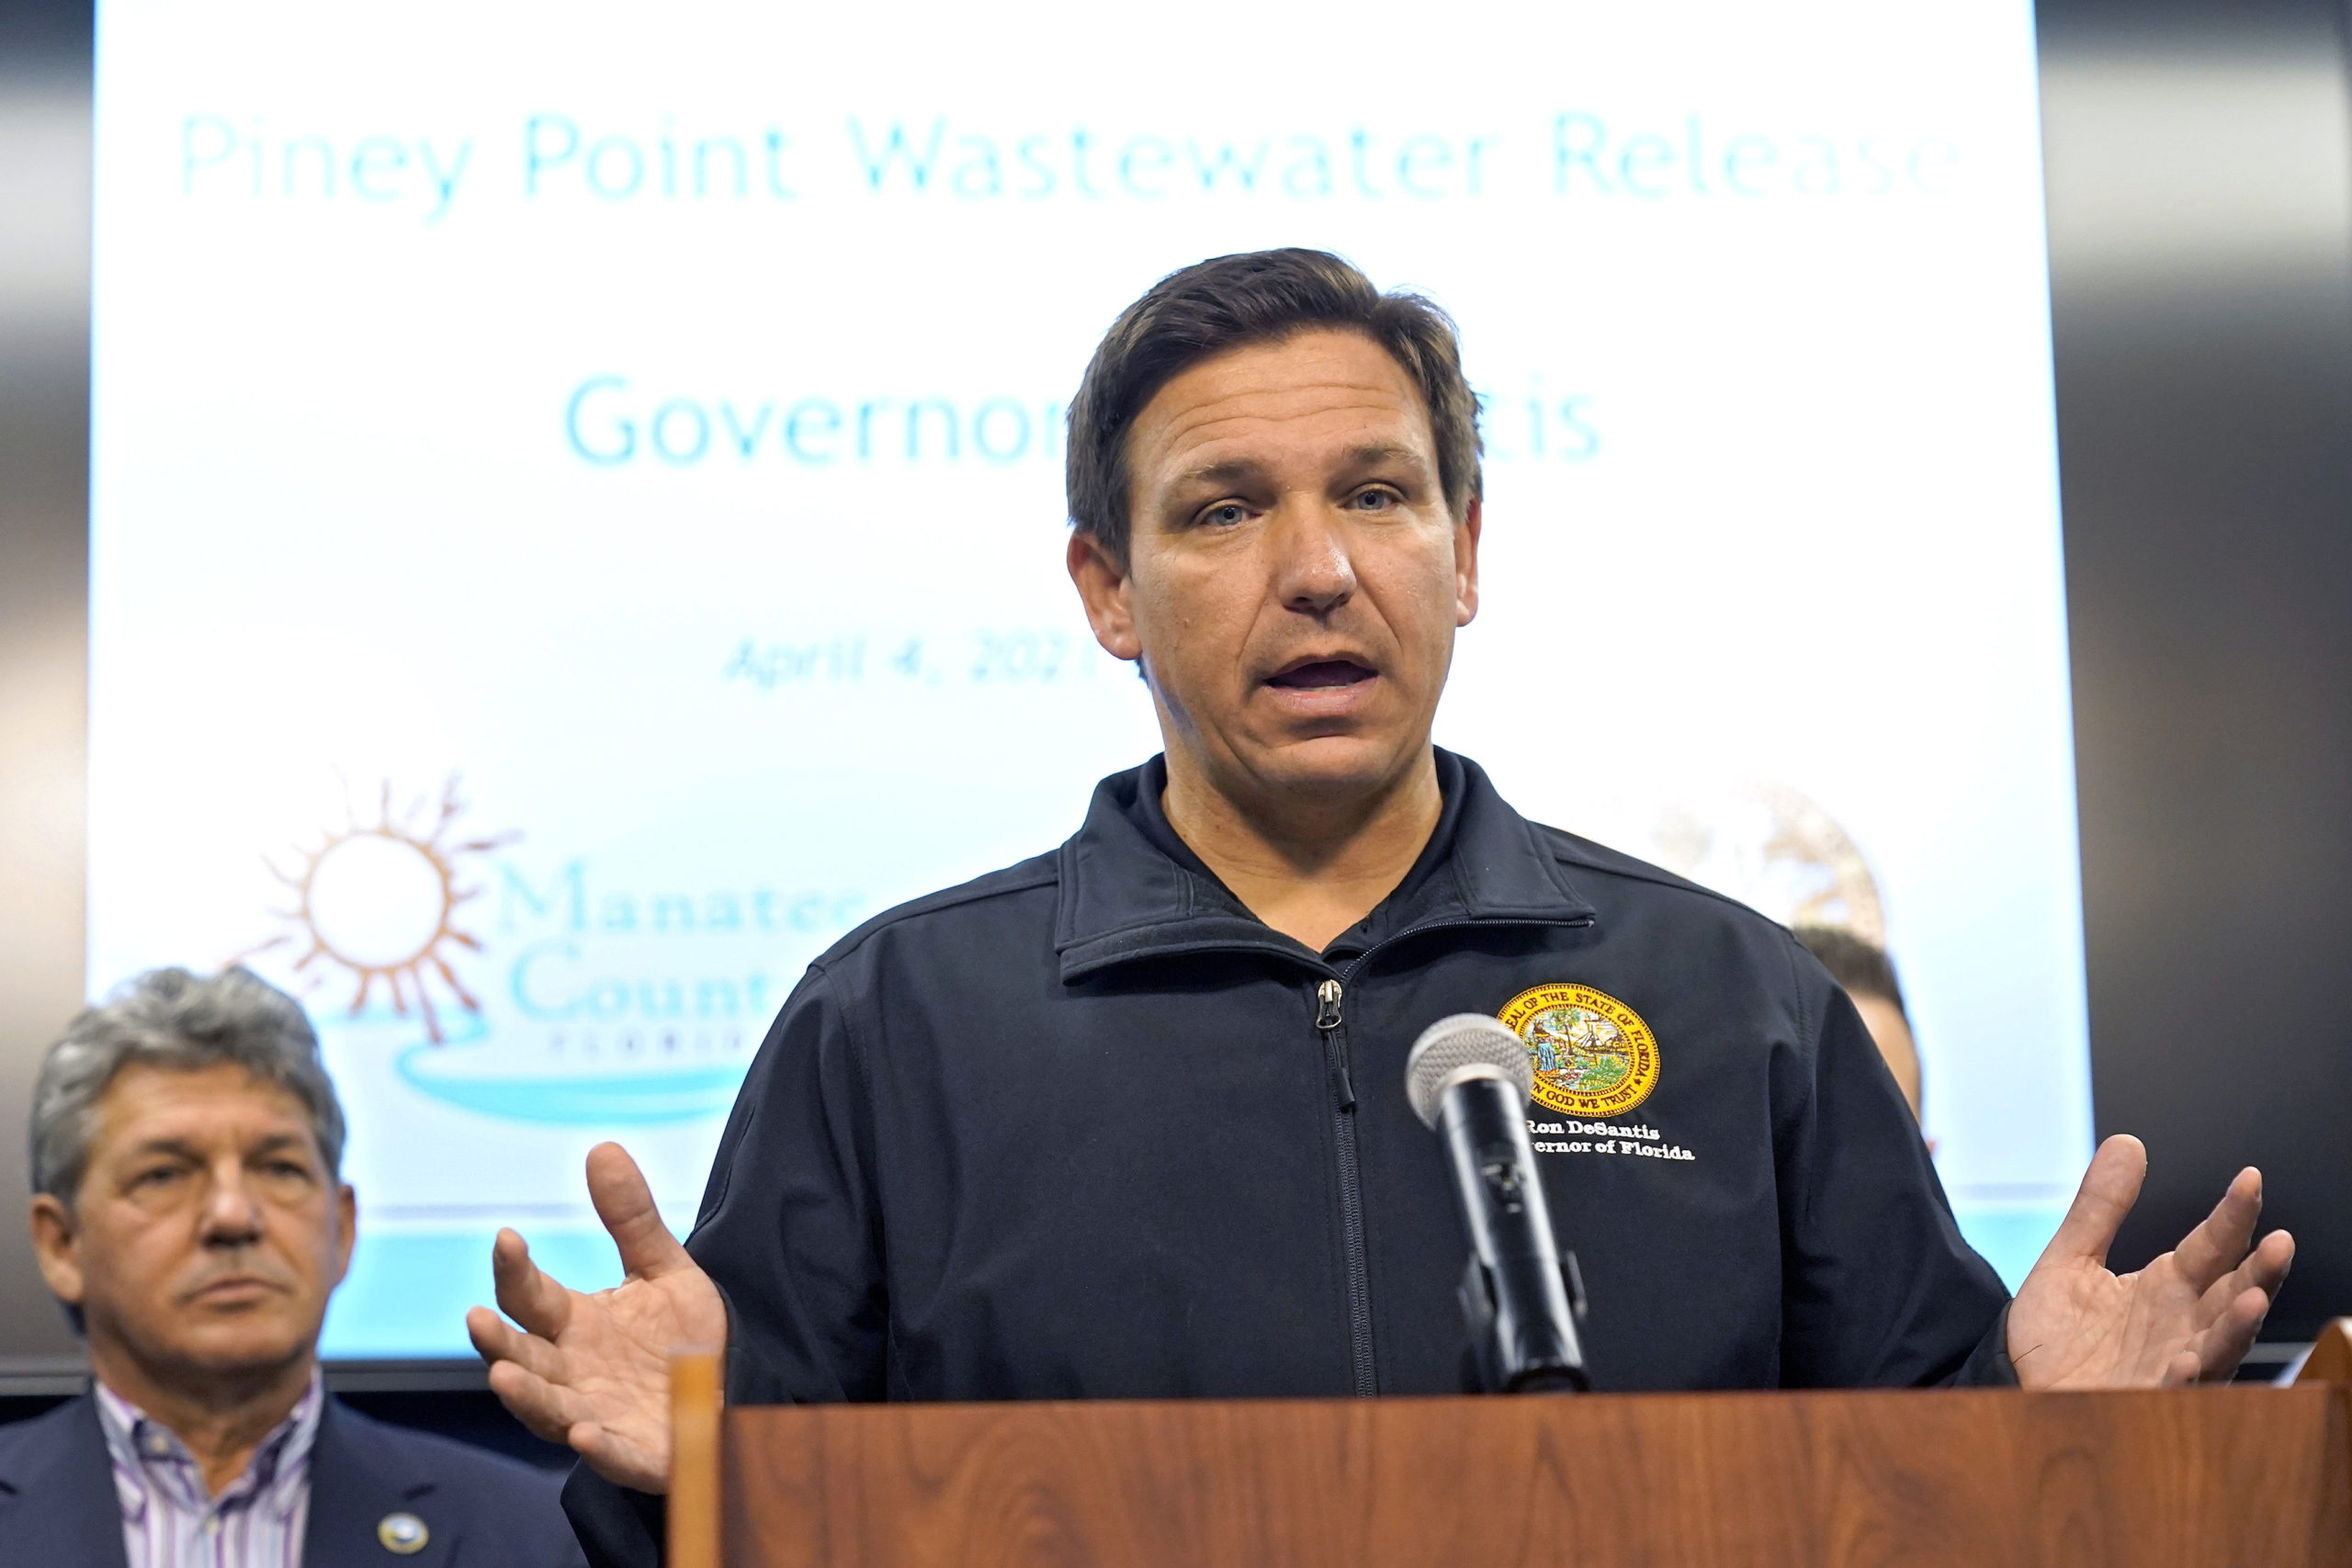 Florida Gov. Ron DeSantis gestures during an April 4 news conference at the Manatee County Emergency Management office in Palmetto, Florida.